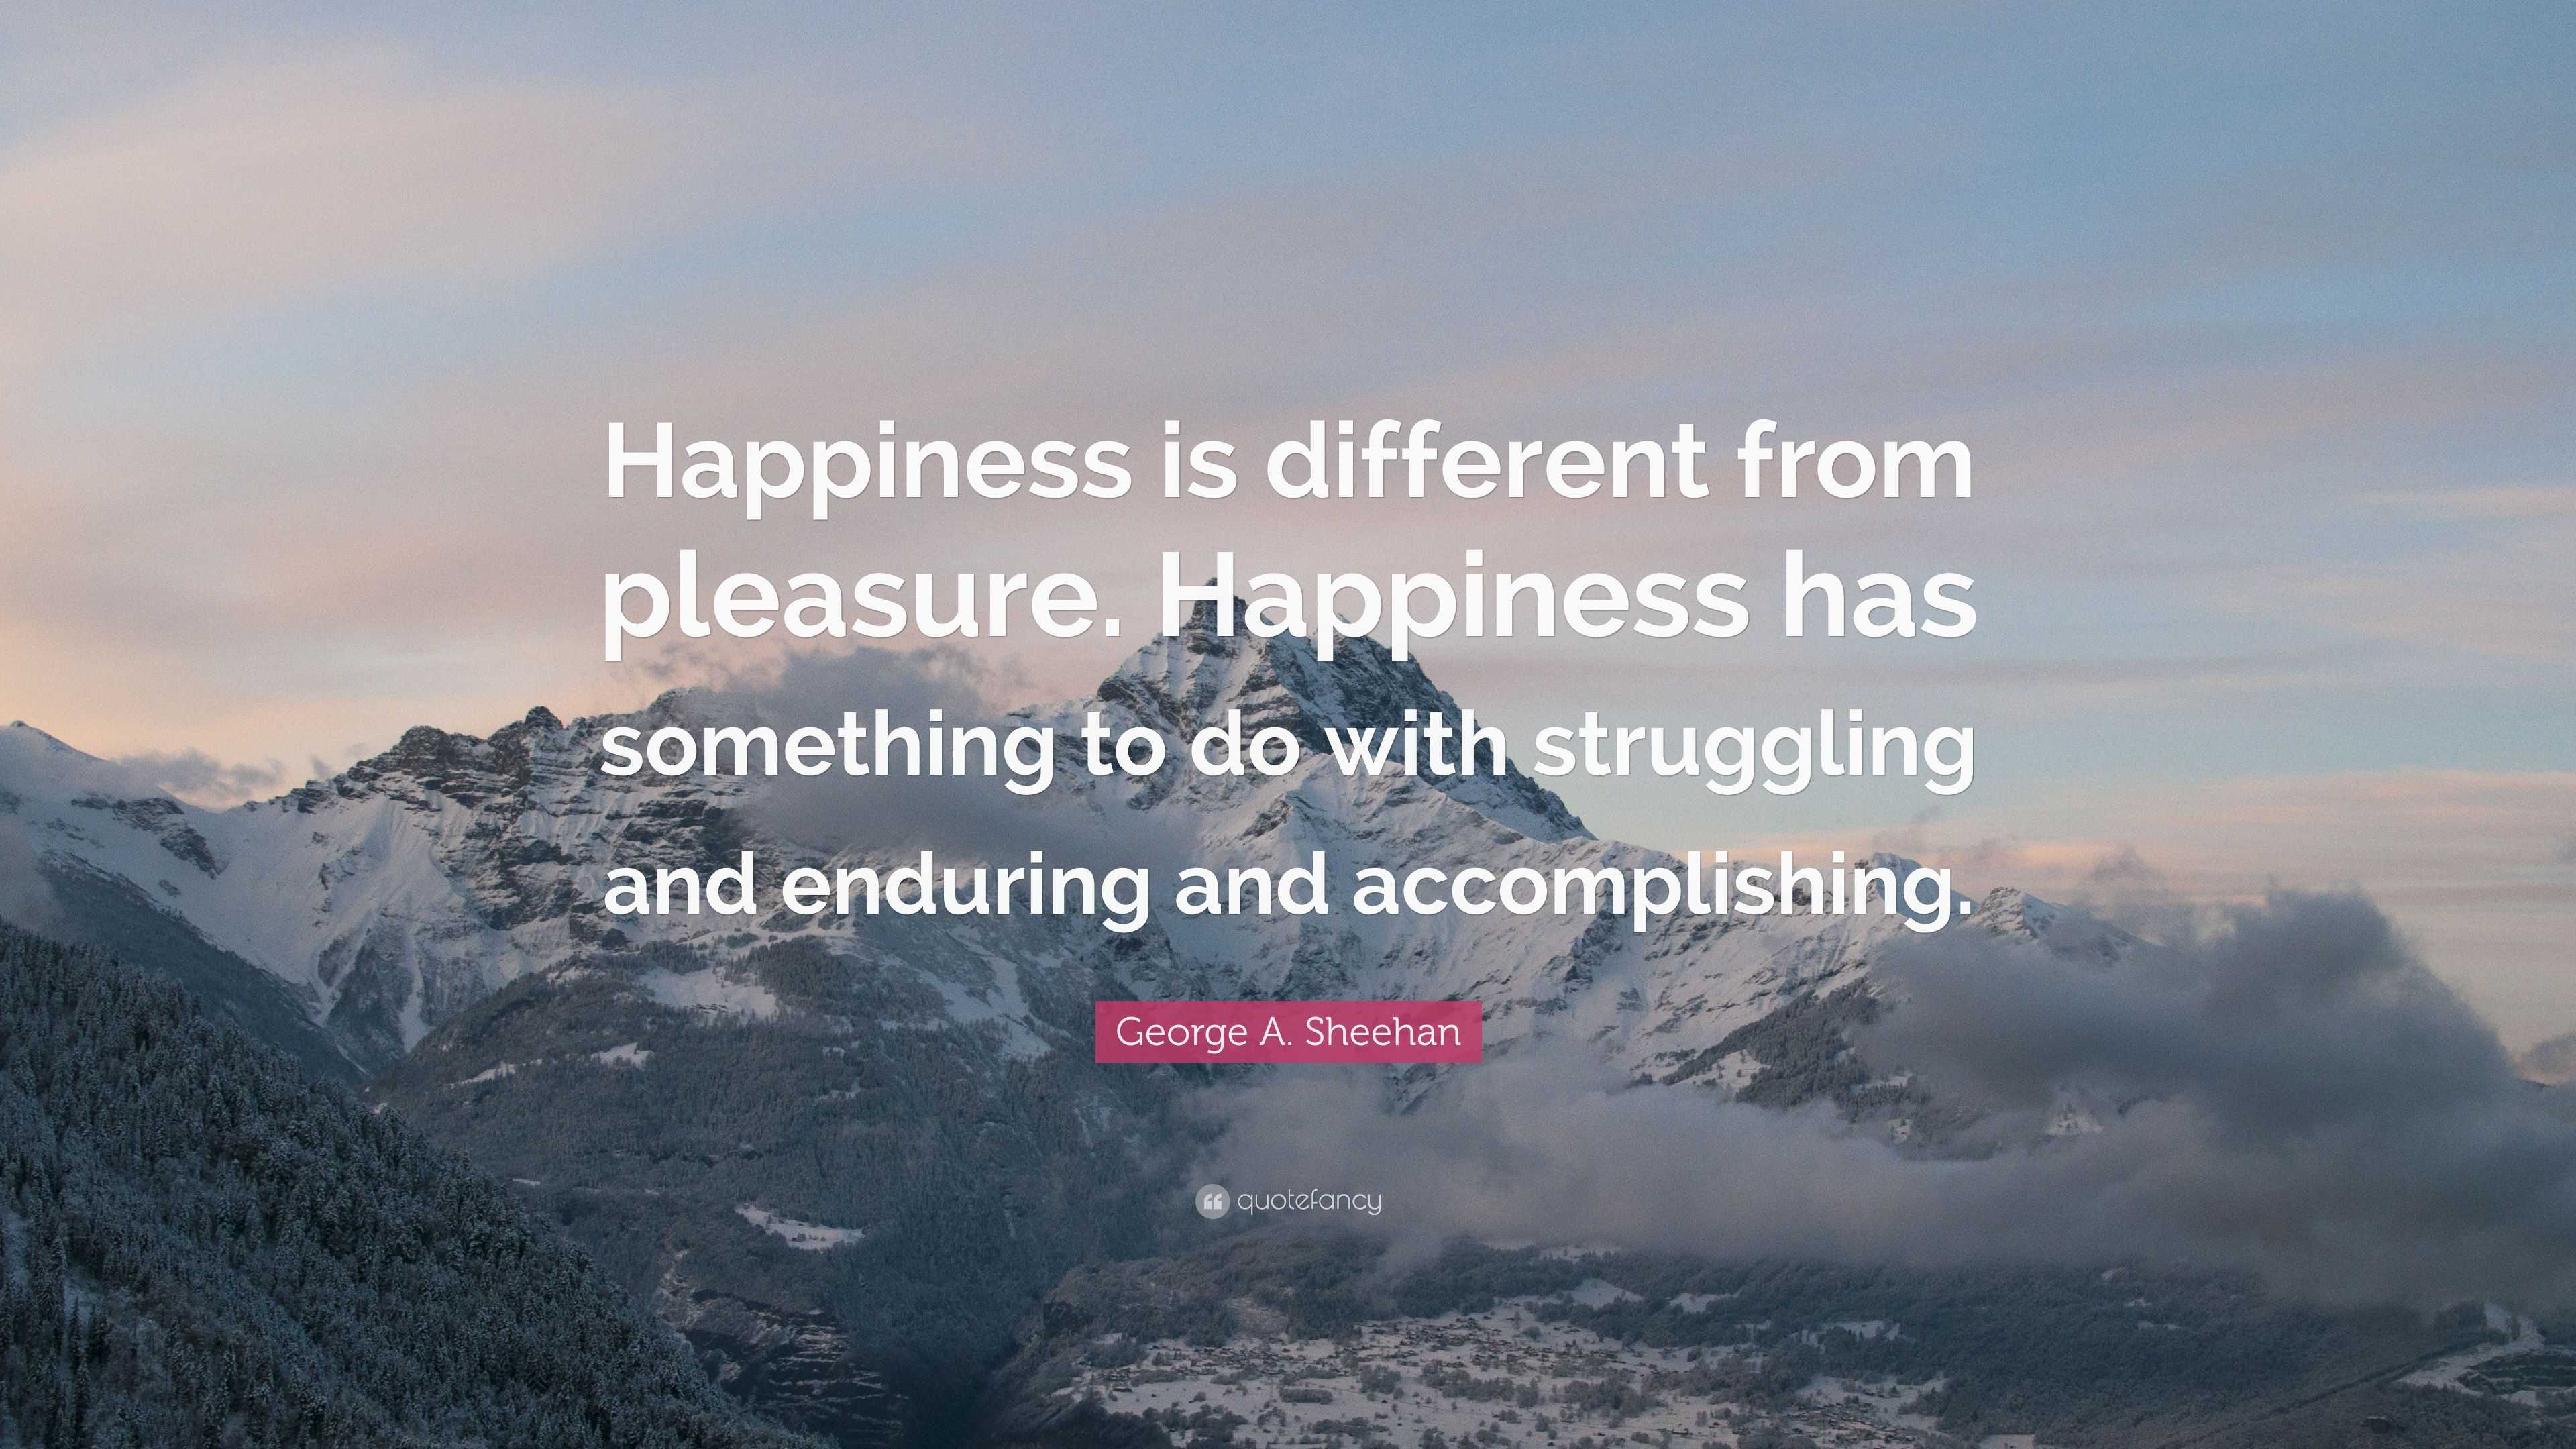 George A. Sheehan Quote: “Happiness is different from pleasure